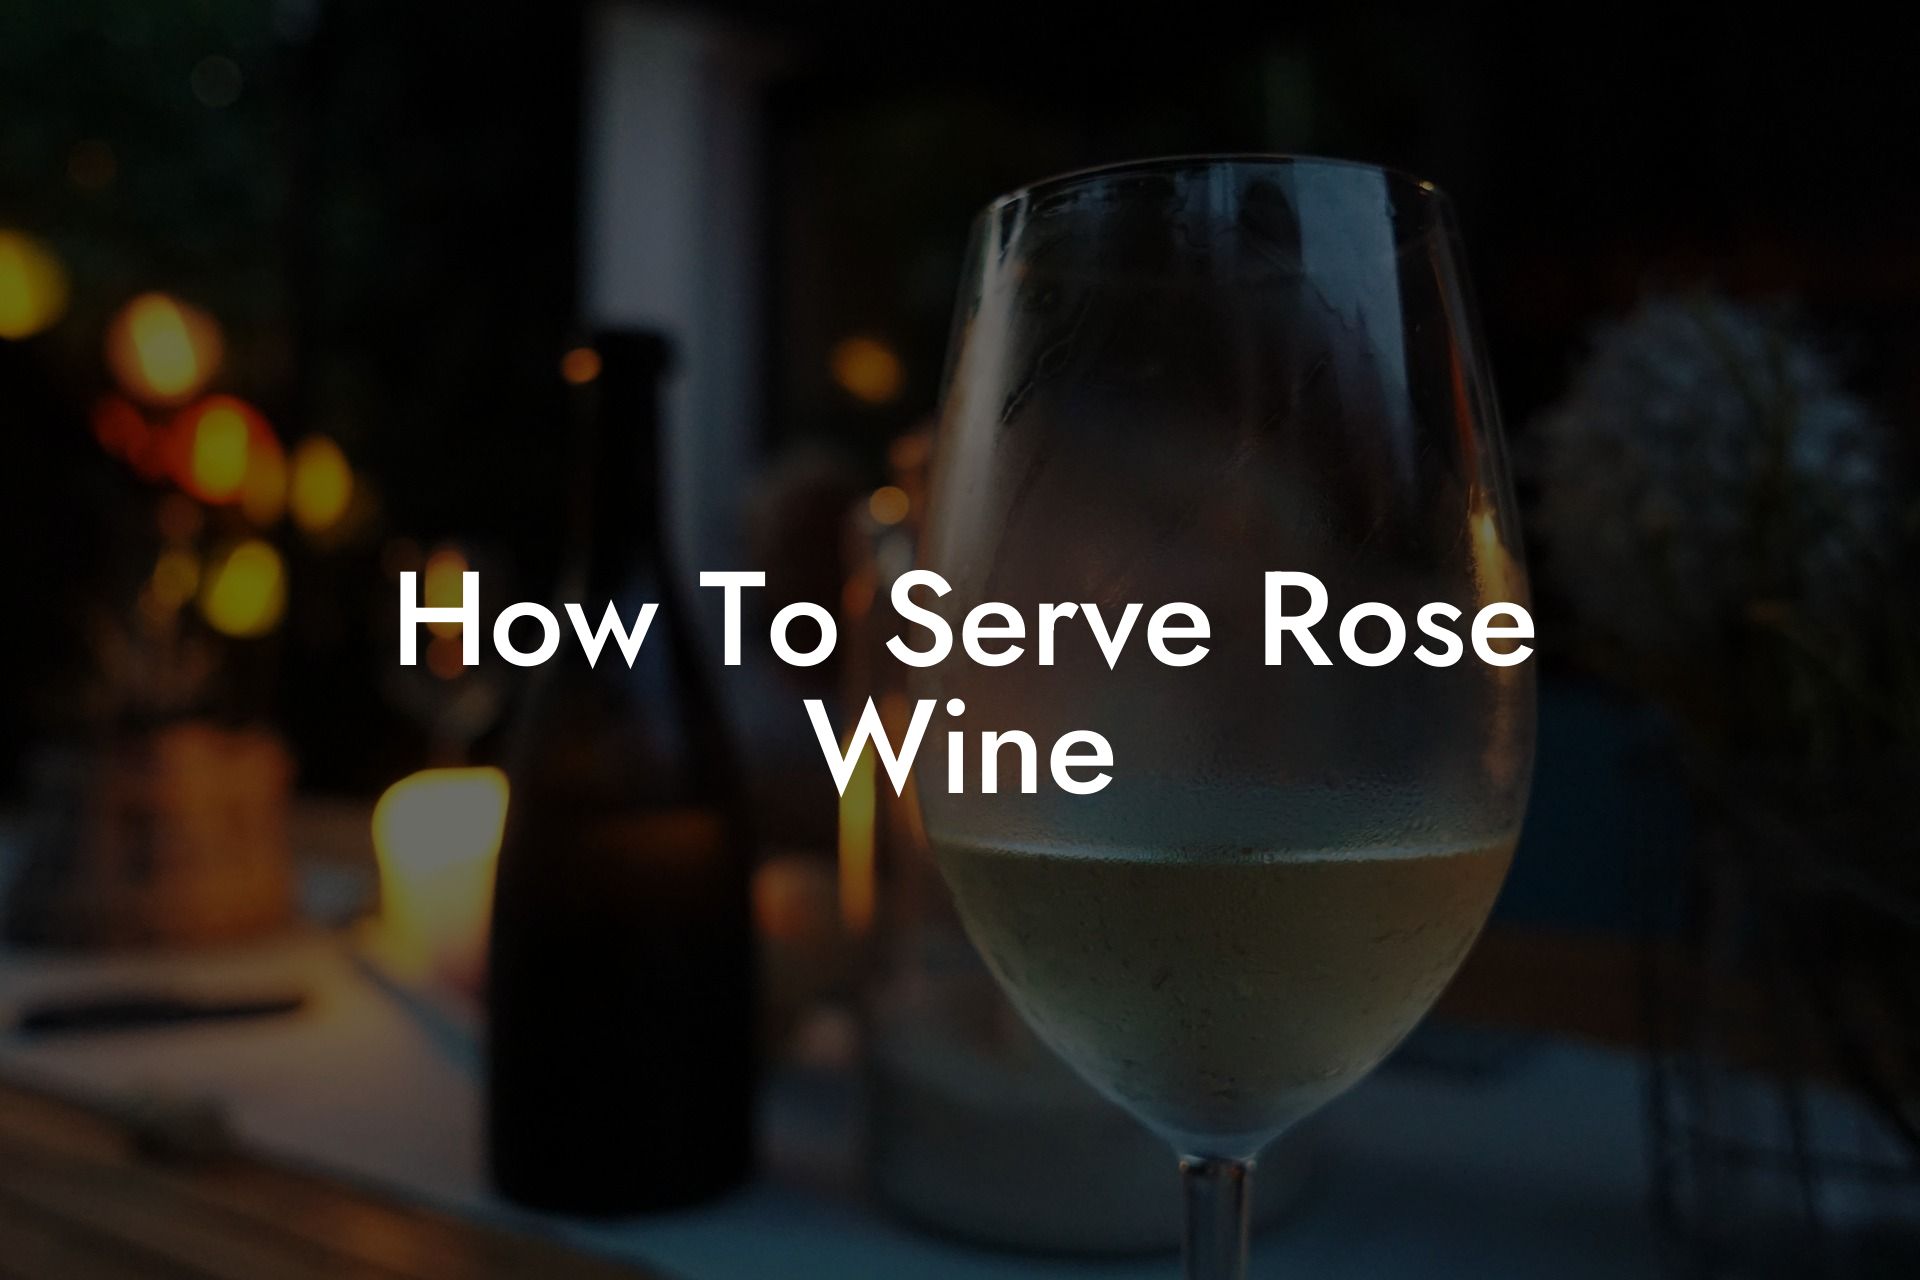 How To Serve Rose Wine